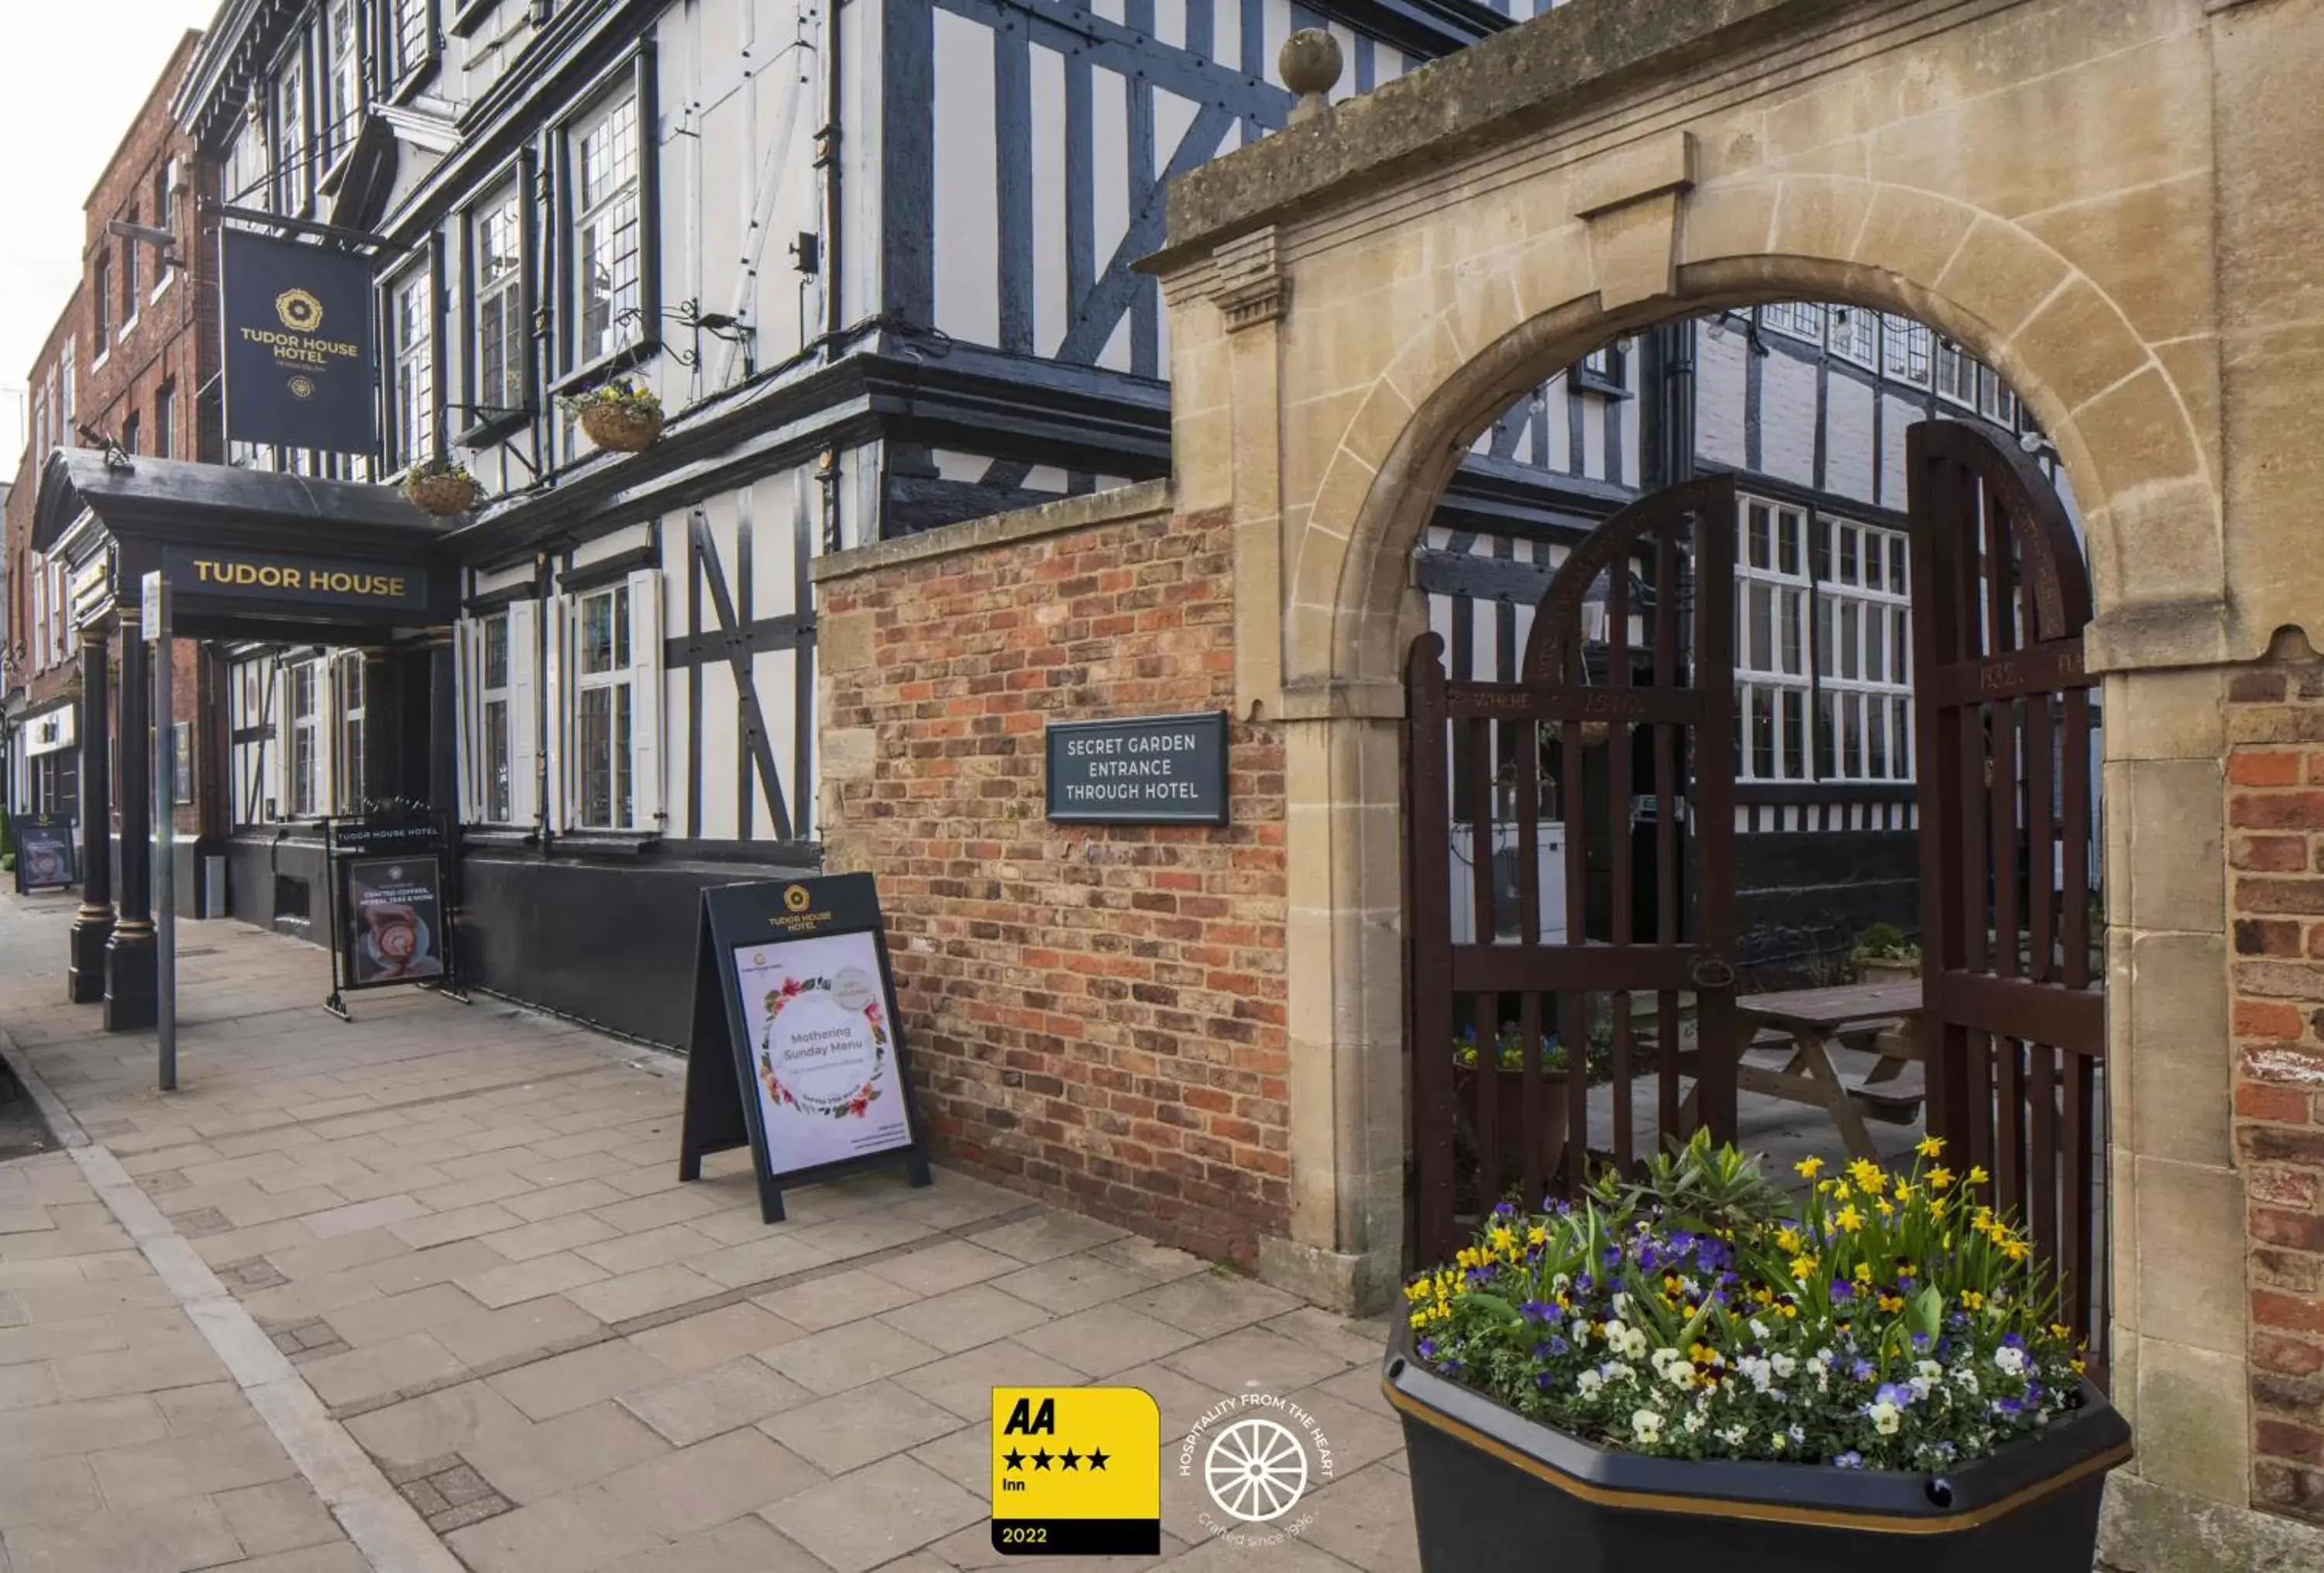 Property building in The Tudor House Hotel, Tewkesbury, Gloucestershire